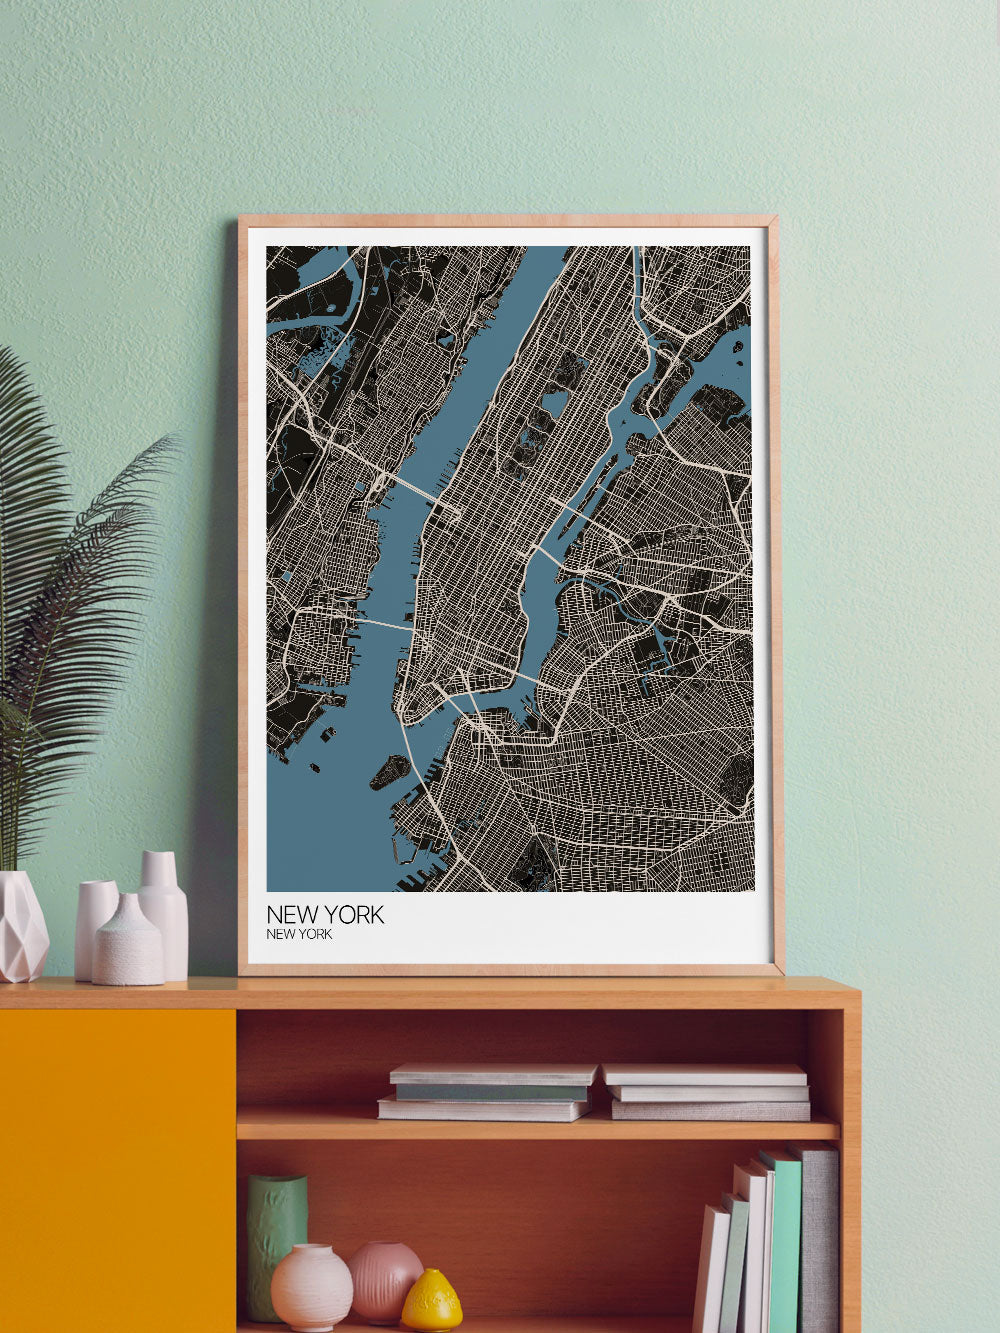 New York Graphic Map Design Print in a frame on a shelf